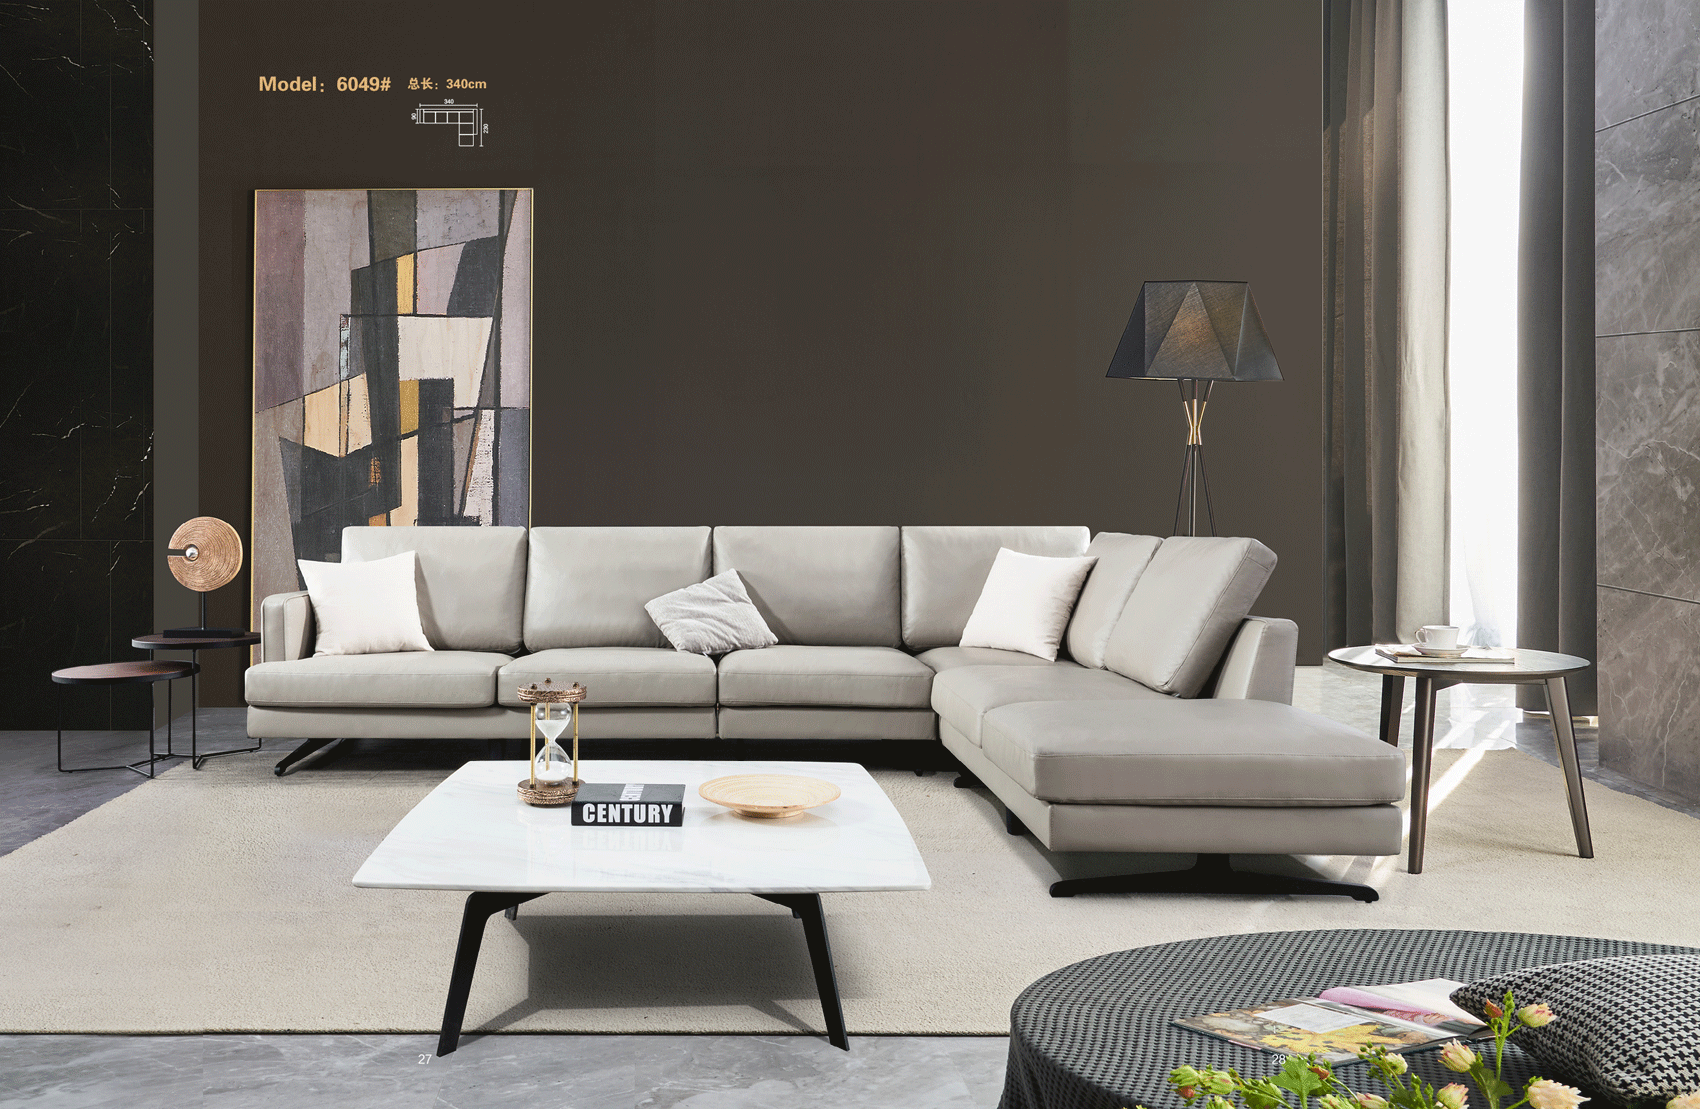 Clearance Living Room 6049 Sectional